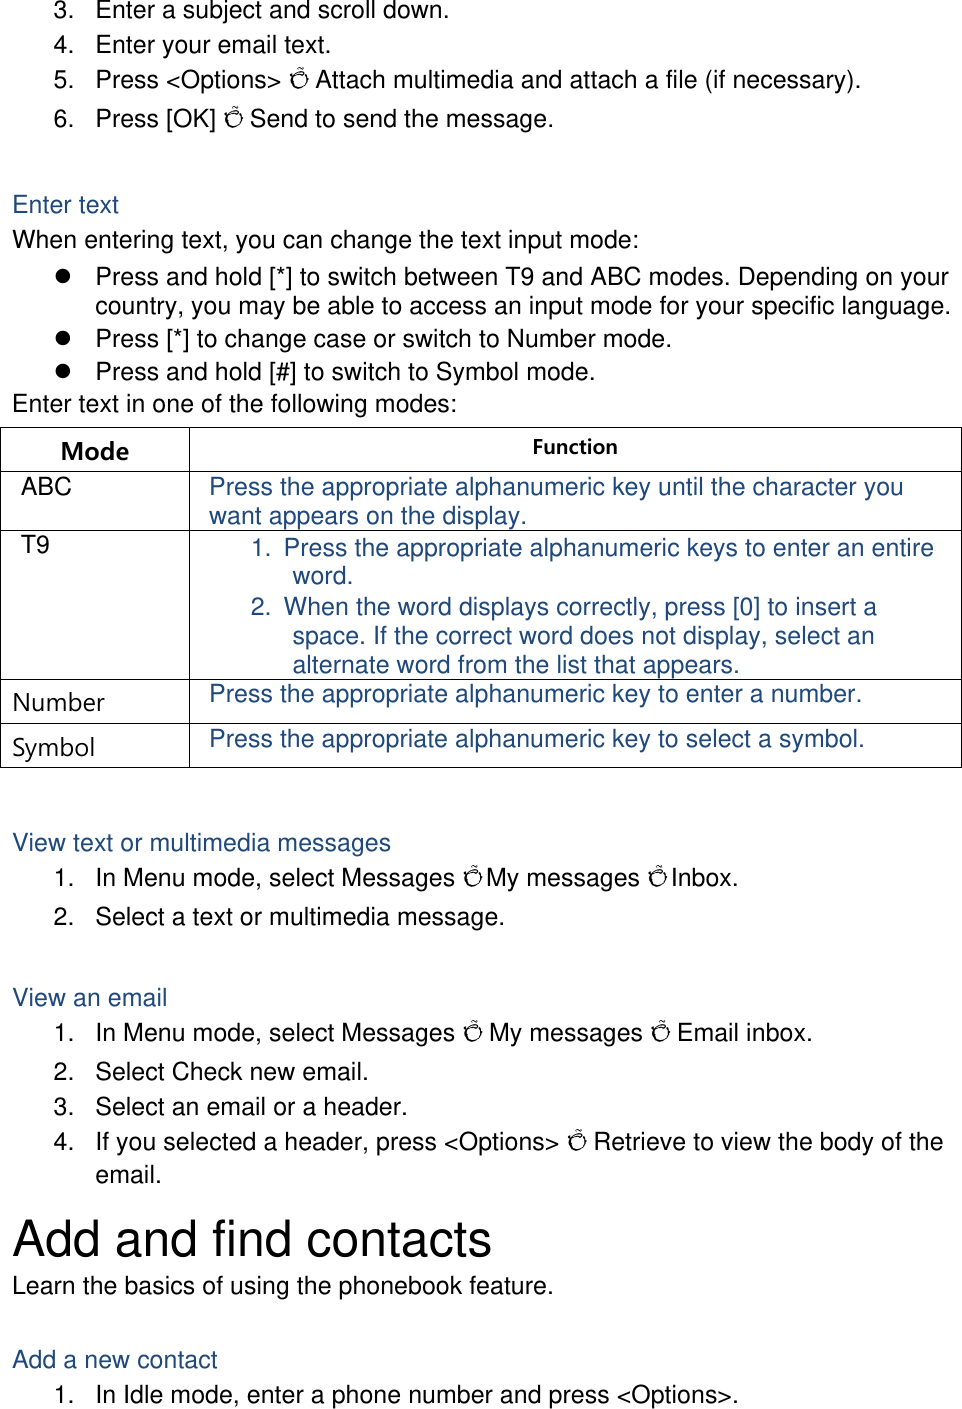 3.  Enter a subject and scroll down. 4.  Enter your email text. 5. Press &lt;Options&gt; Õ Attach multimedia and attach a file (if necessary). 6. Press [OK] Õ Send to send the message.  Enter text When entering text, you can change the text input mode: z  Press and hold [*] to switch between T9 and ABC modes. Depending on your country, you may be able to access an input mode for your specific language. z  Press [*] to change case or switch to Number mode. z  Press and hold [#] to switch to Symbol mode. Enter text in one of the following modes: Mode  Function ABC  Press the appropriate alphanumeric key until the character you want appears on the display. T9  1.  Press the appropriate alphanumeric keys to enter an entire word. 2.  When the word displays correctly, press [0] to insert a space. If the correct word does not display, select an alternate word from the list that appears. Number  Press the appropriate alphanumeric key to enter a number. Symbol  Press the appropriate alphanumeric key to select a symbol.  View text or multimedia messages 1.  In Menu mode, select Messages Õ My messages Õ Inbox. 2.  Select a text or multimedia message.  View an email 1.  In Menu mode, select Messages Õ My messages Õ Email inbox. 2.  Select Check new email. 3.  Select an email or a header. 4.  If you selected a header, press &lt;Options&gt; Õ Retrieve to view the body of the email. Add and find contacts Learn the basics of using the phonebook feature.  Add a new contact 1.  In Idle mode, enter a phone number and press &lt;Options&gt;. 